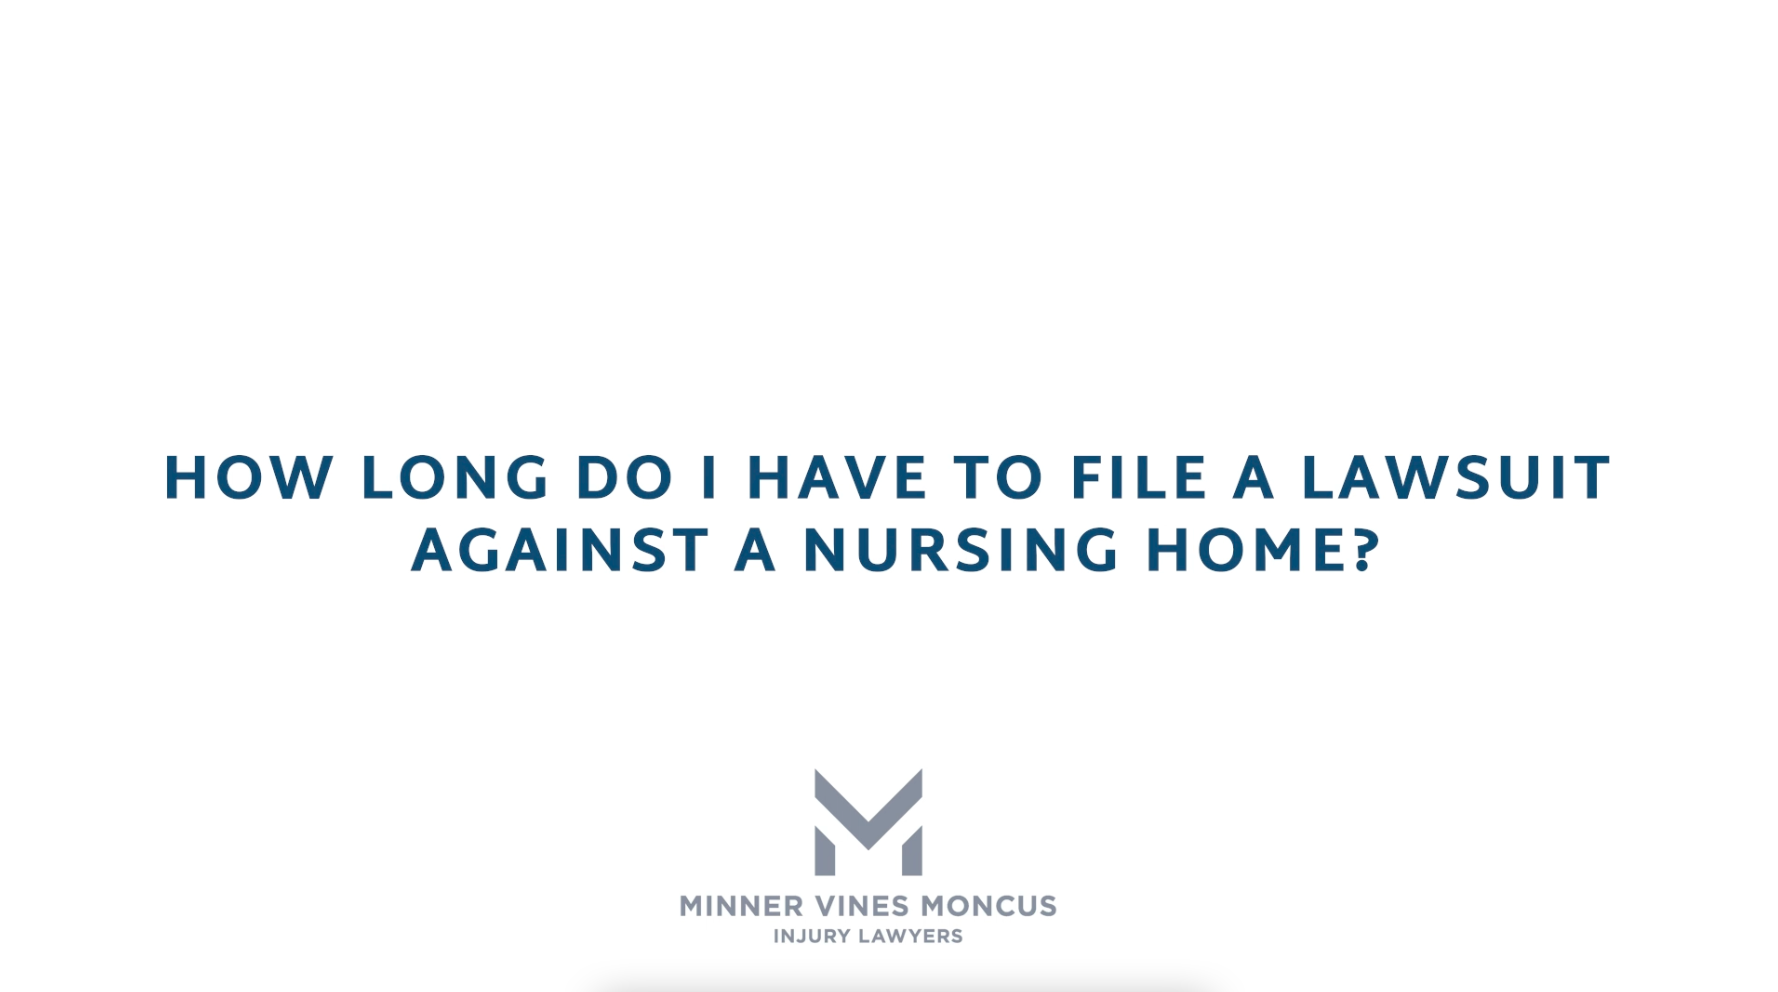 How long do I have to file a lawsuit against a nursing home?